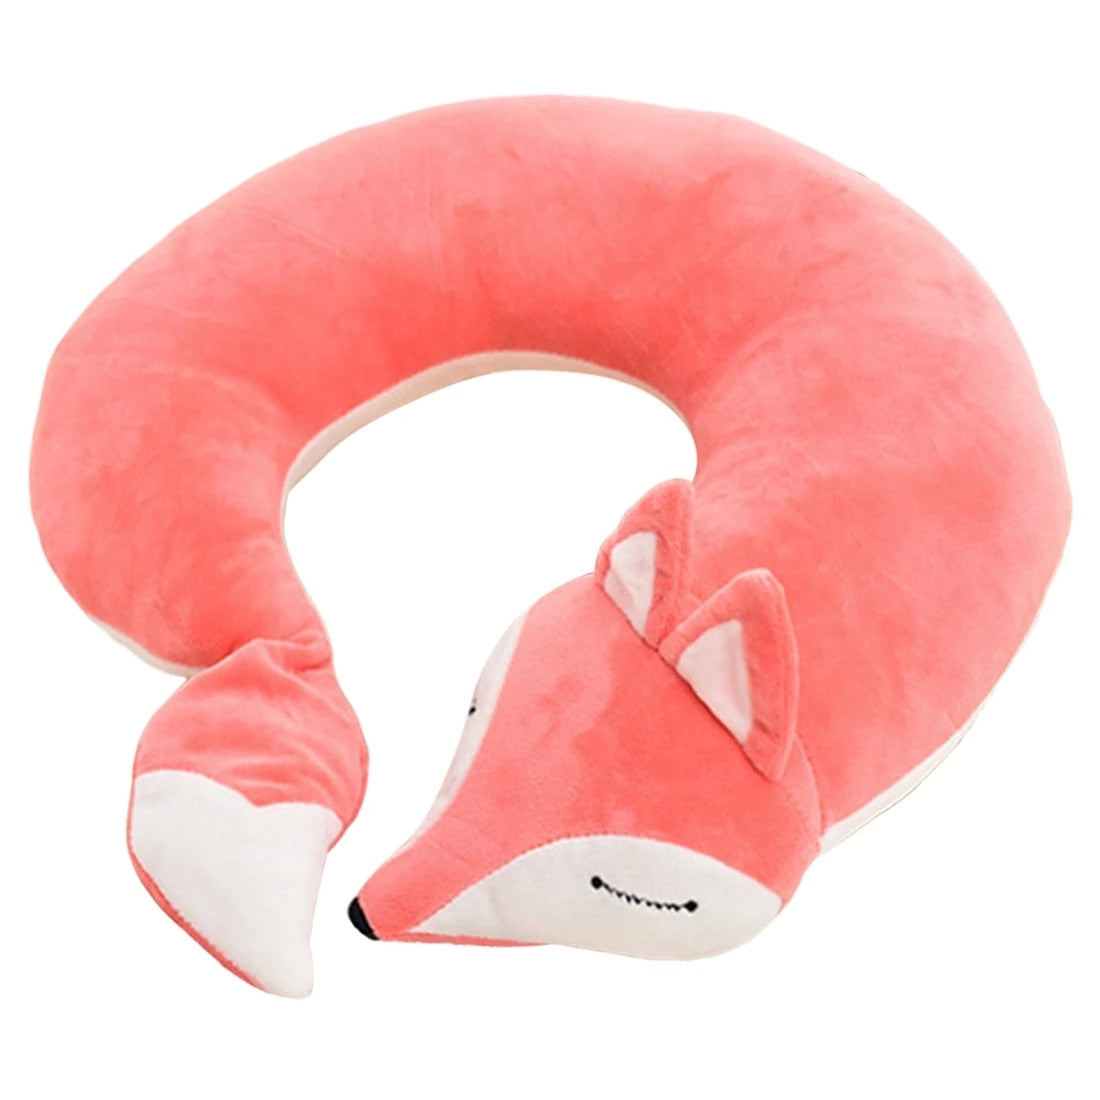 U Shaped Kids Hooded Neck Pillow for Airplane Travel